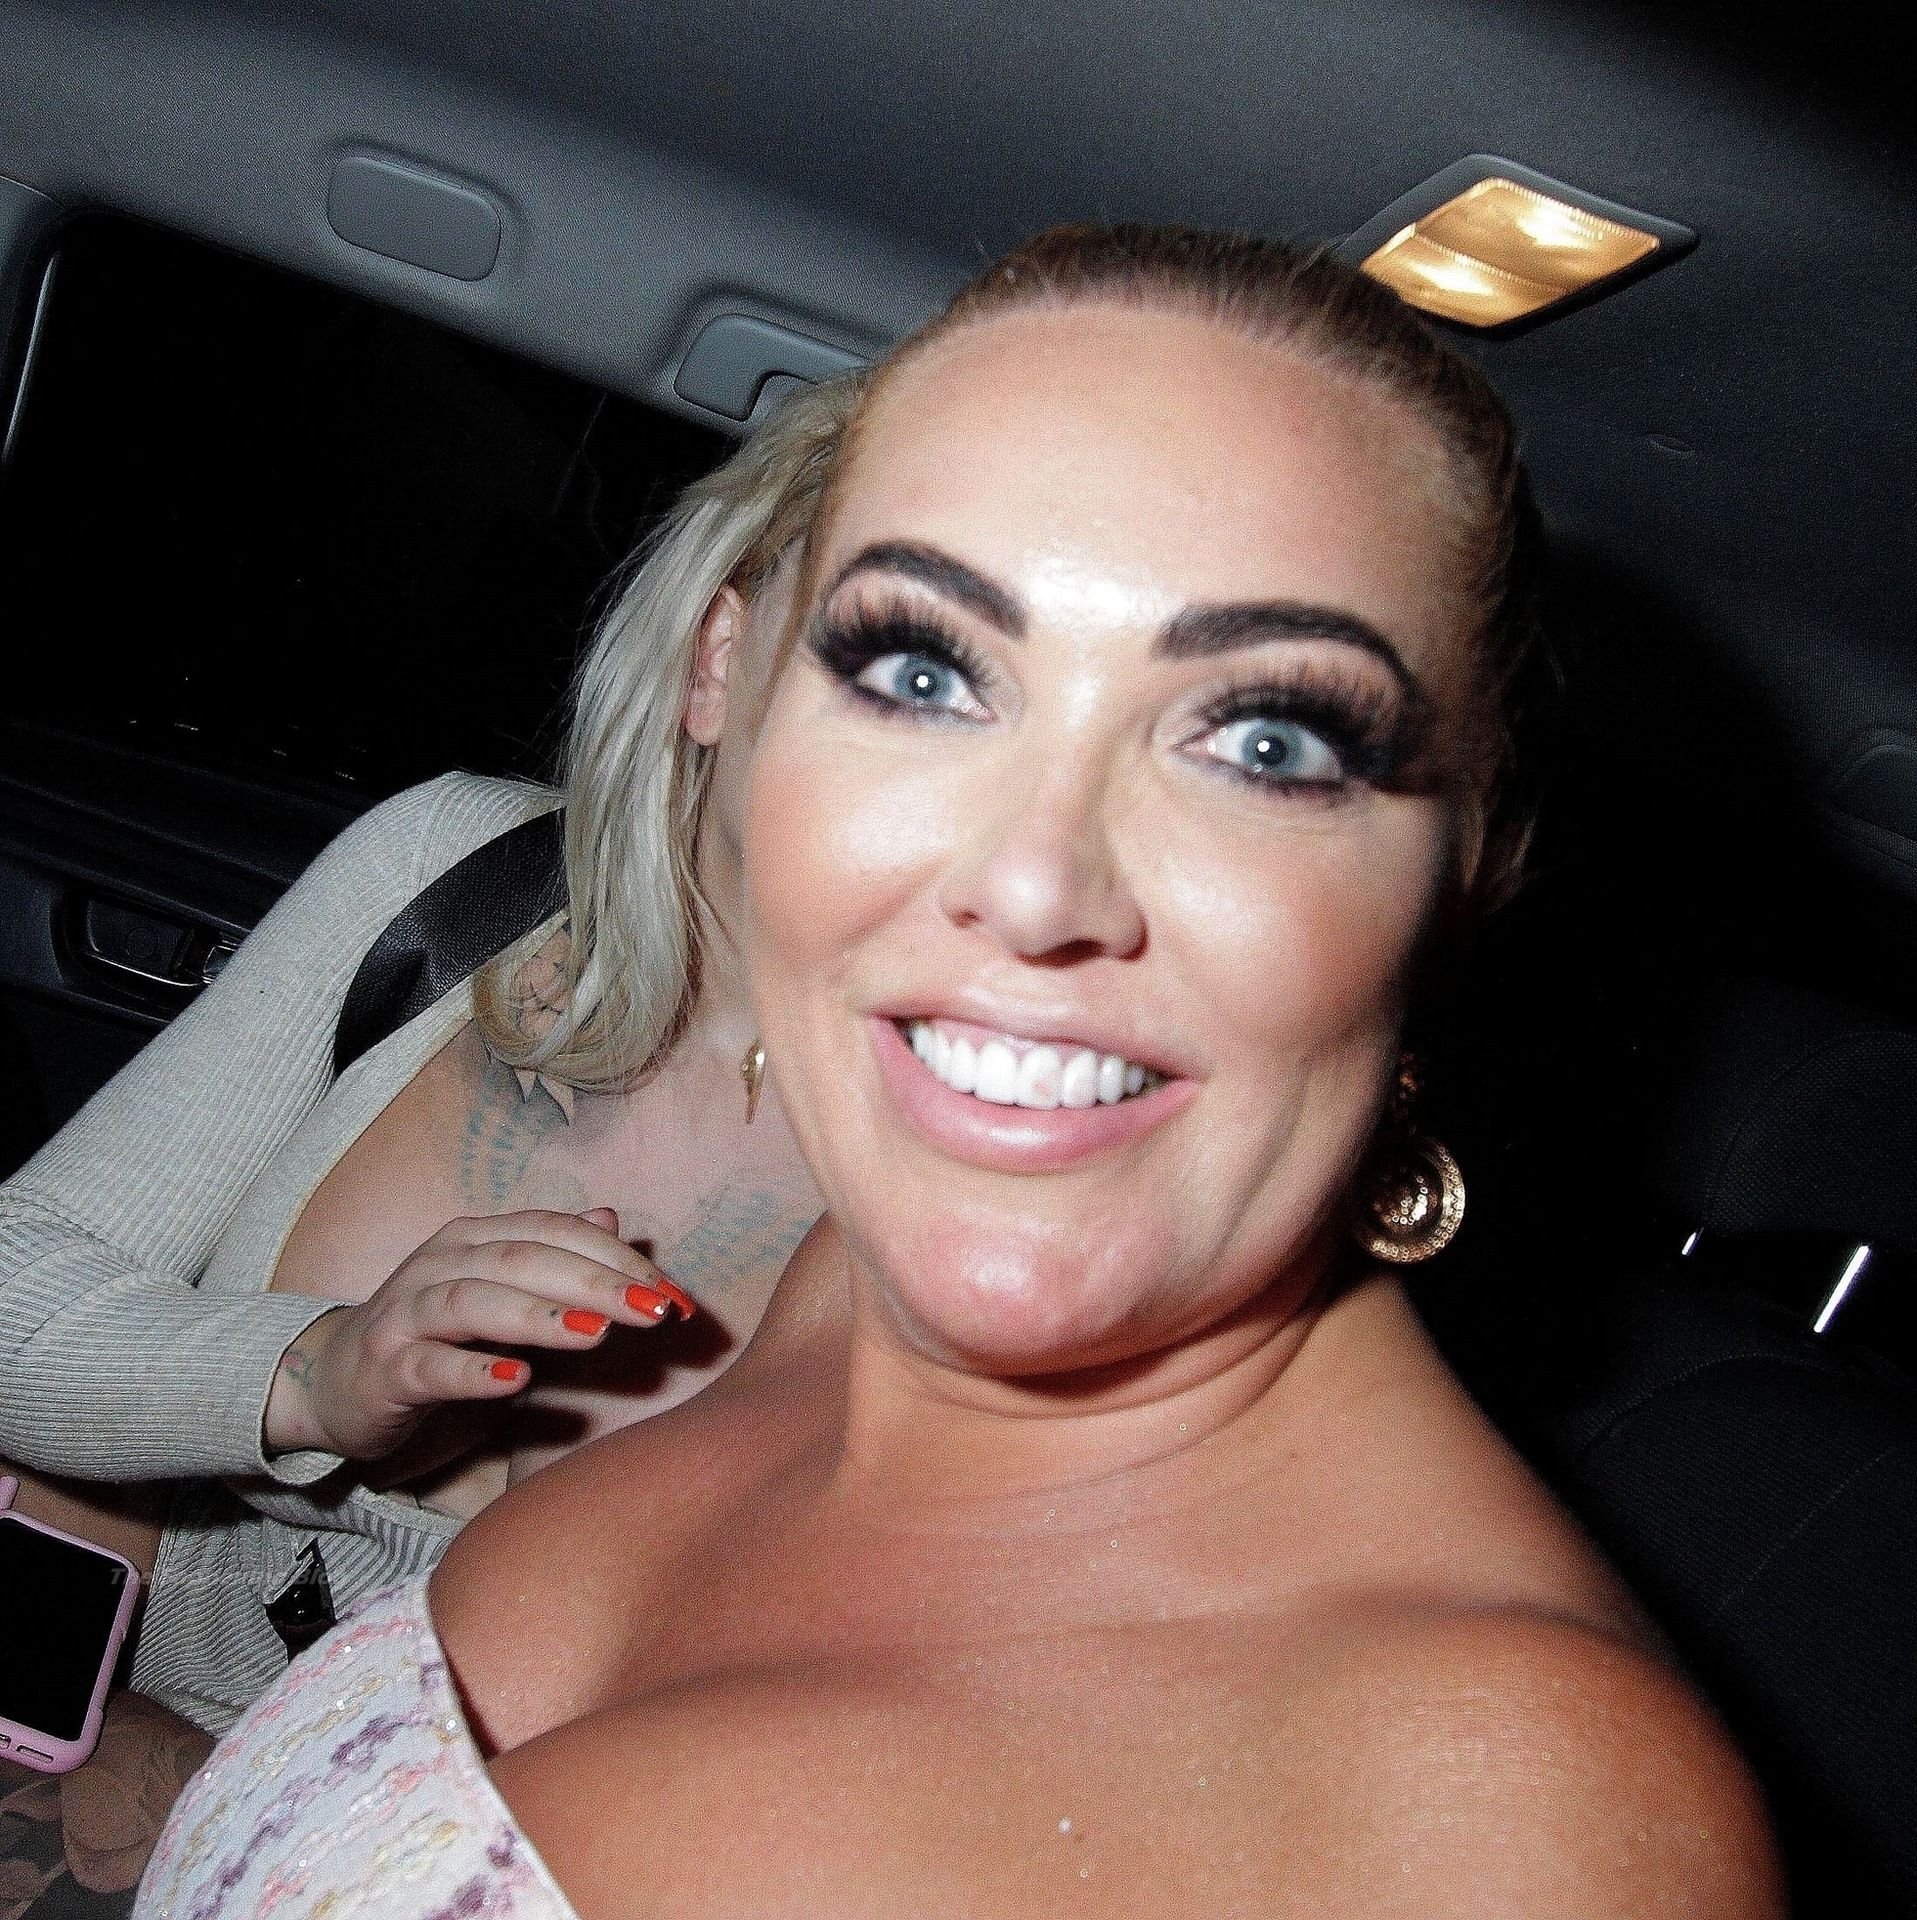 Aisleyne Horgan-Wallace is Pictured at The National Reality Awards in London (15 Photos)